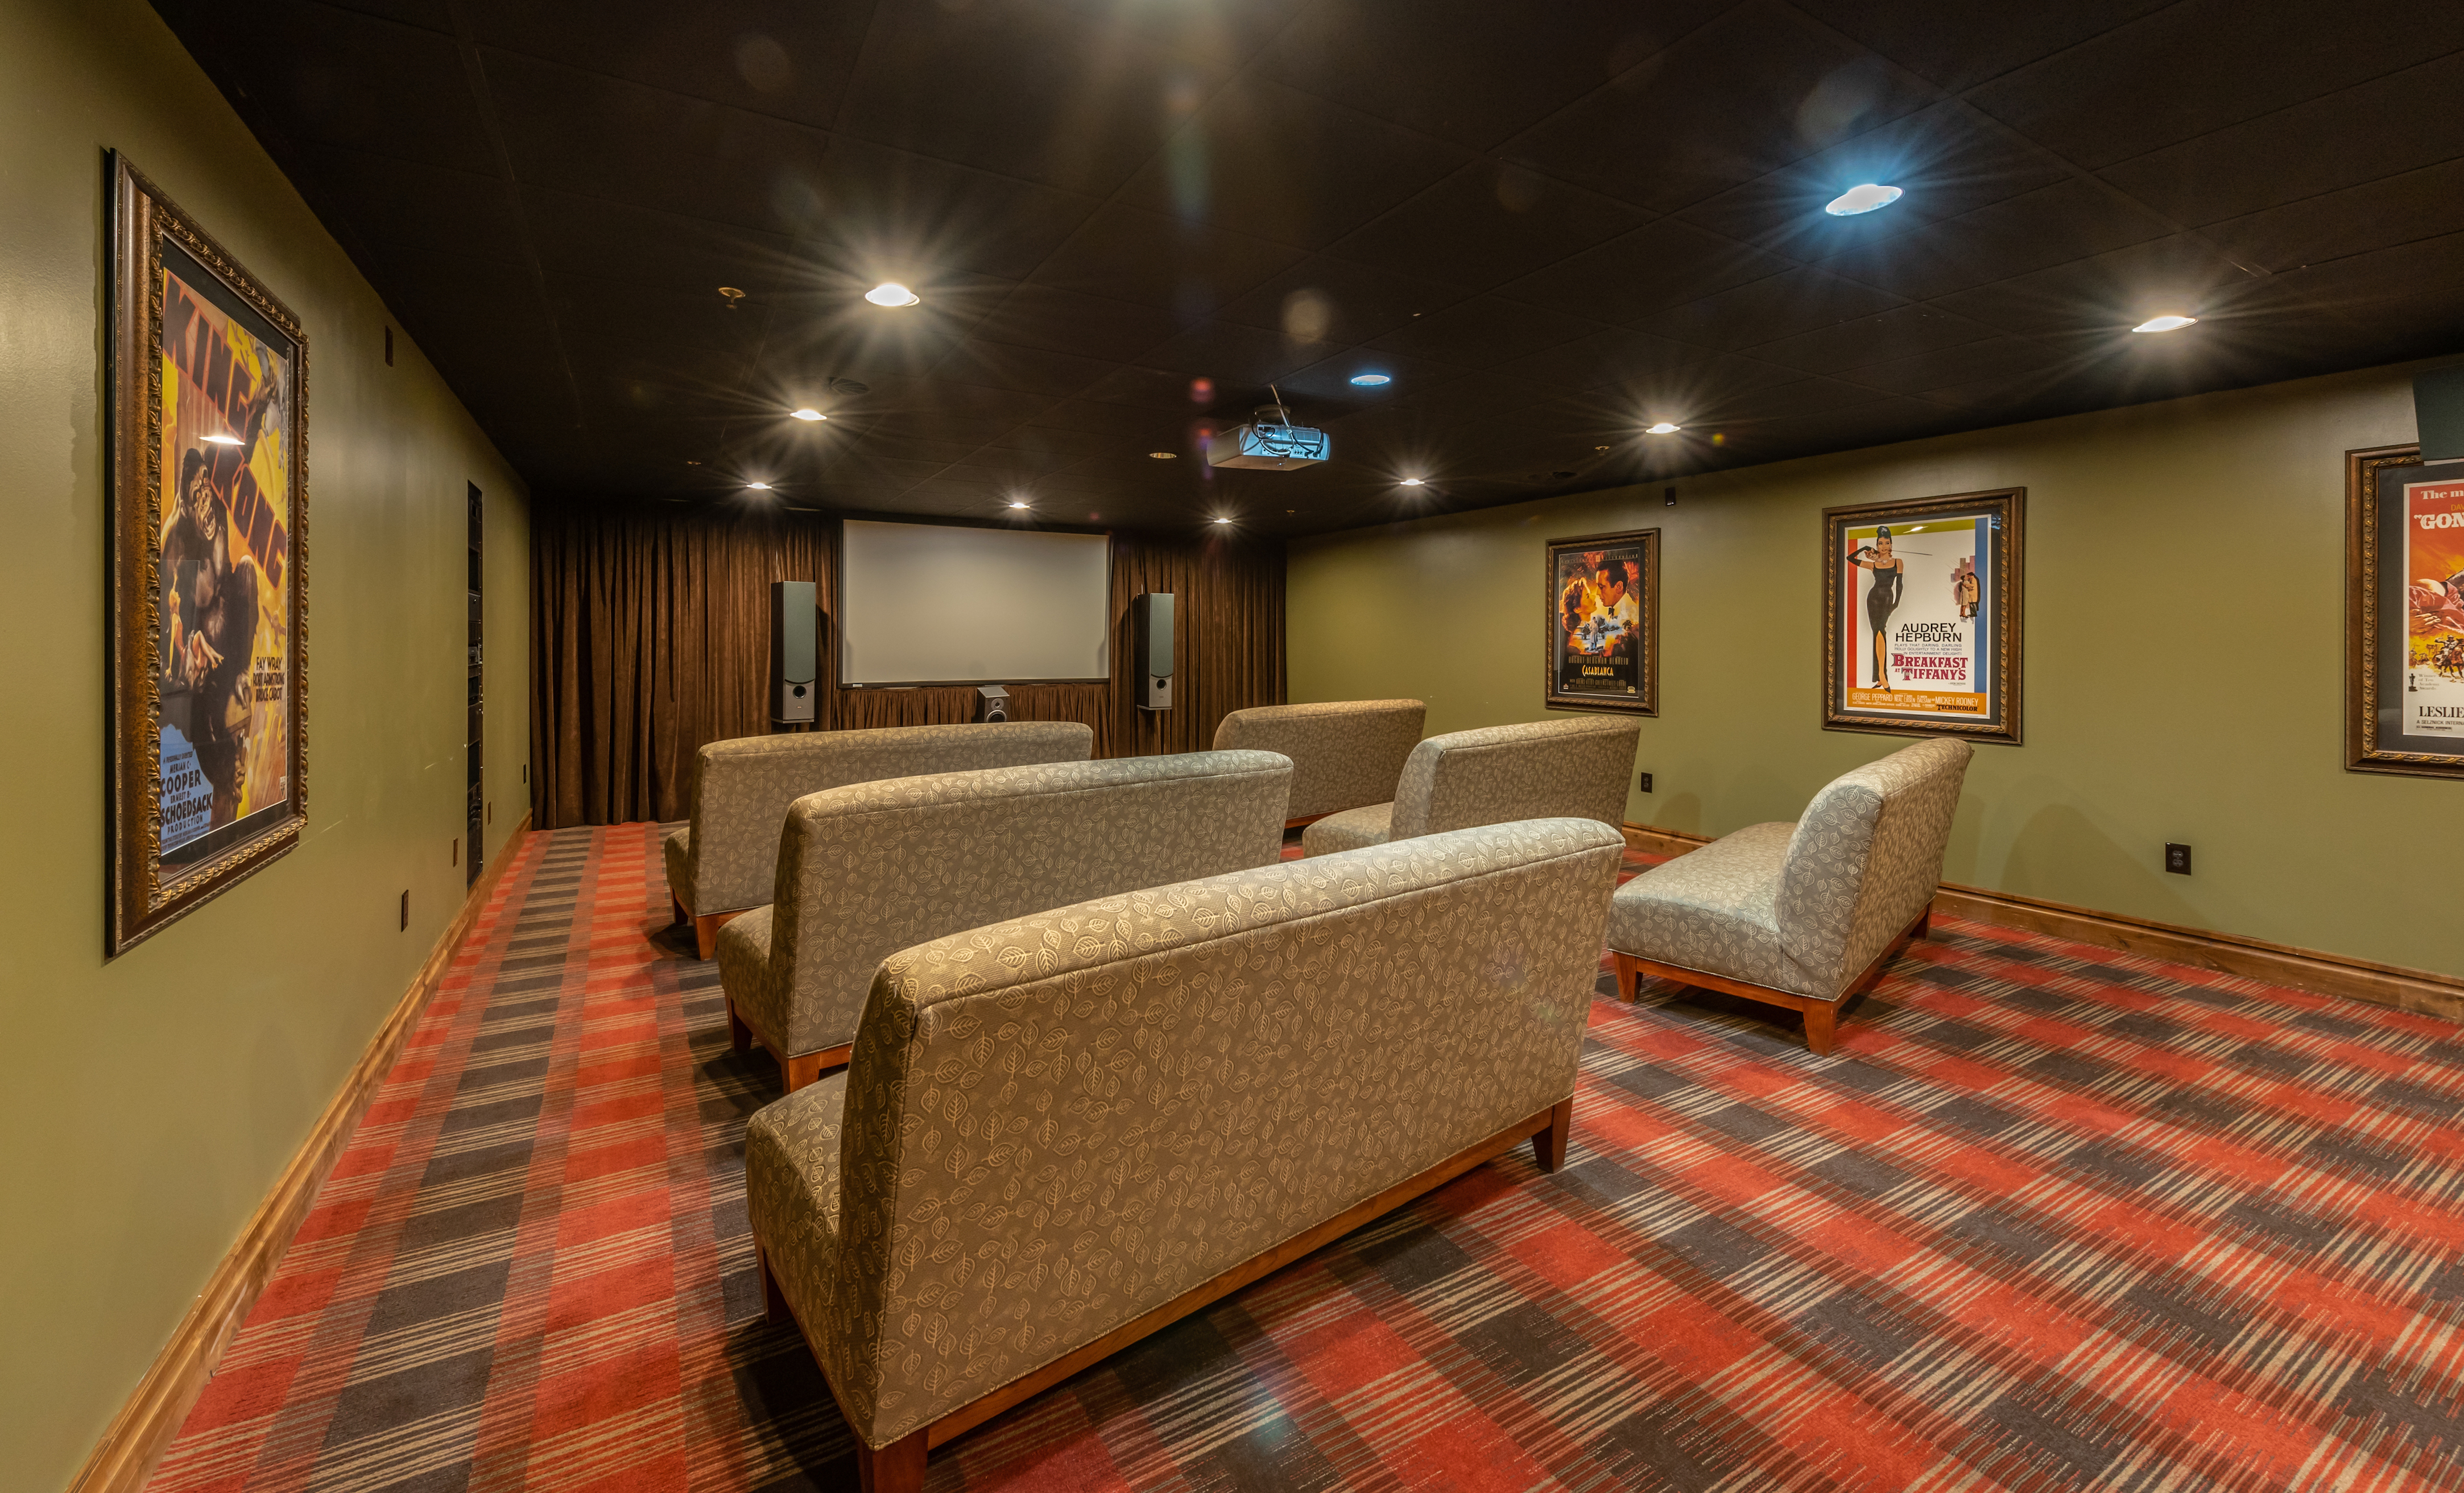 Reserve the property screening room for the enjoyment of your friends and family